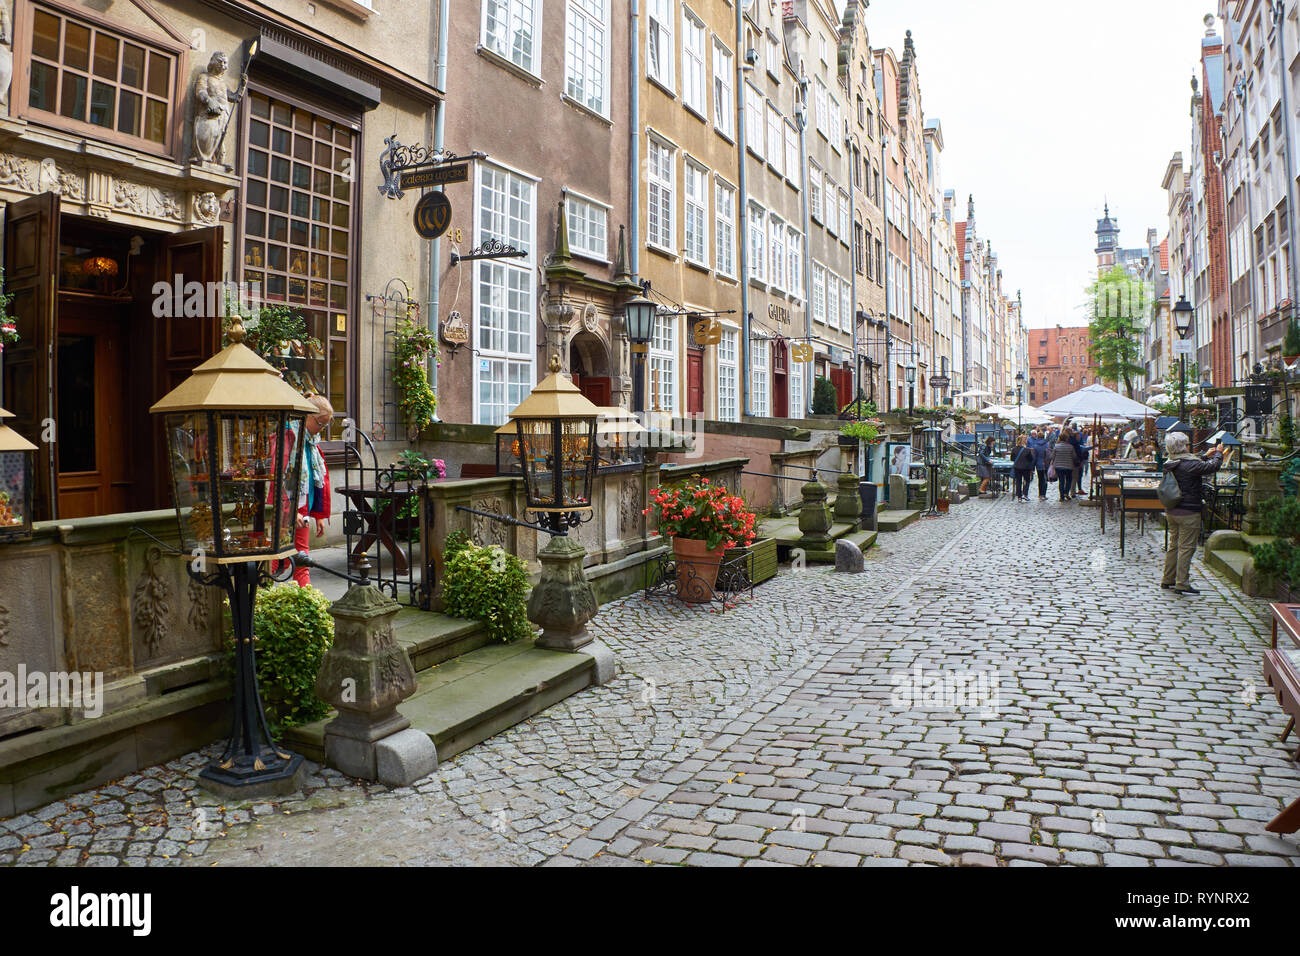 GDANSK, POLAND - SEPTEMBER 09, 2017: Ulica Mariacka in the old town. Streets in historical center of Gdansk Stock Photo